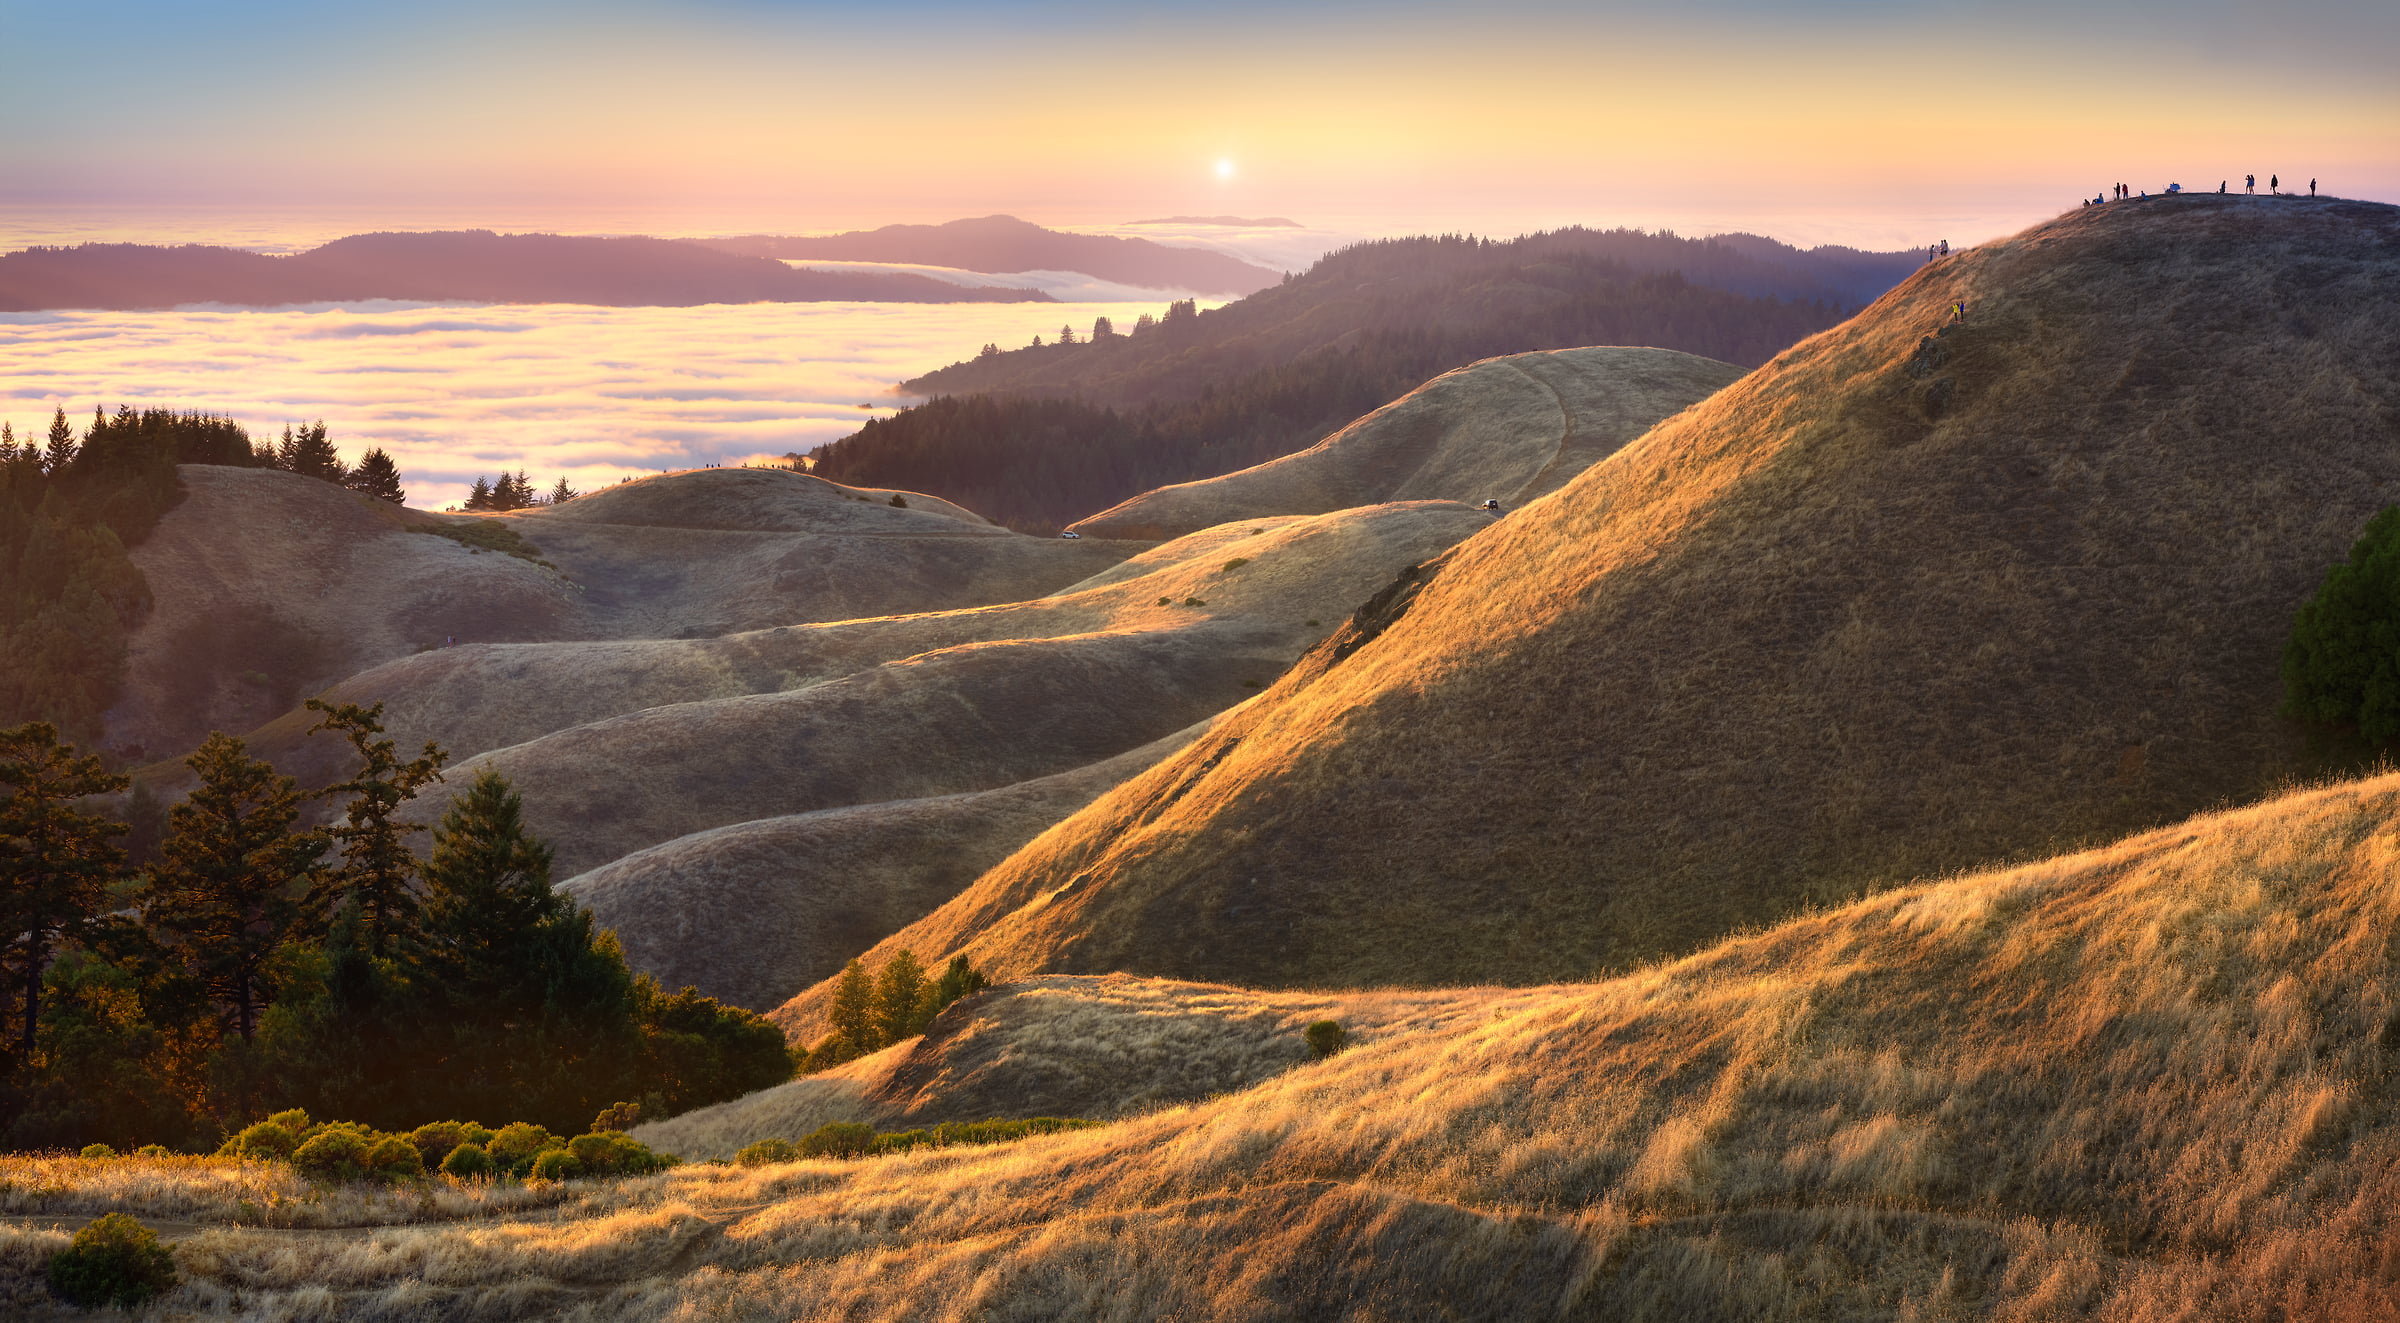 215 megapixels! A very high resolution, large-format VAST photo print of a sunset over hills, mountains, and clouds in Marin county, California; photograph created by Jeff Lewis from Mt. Tamalpais in Marin County, California.